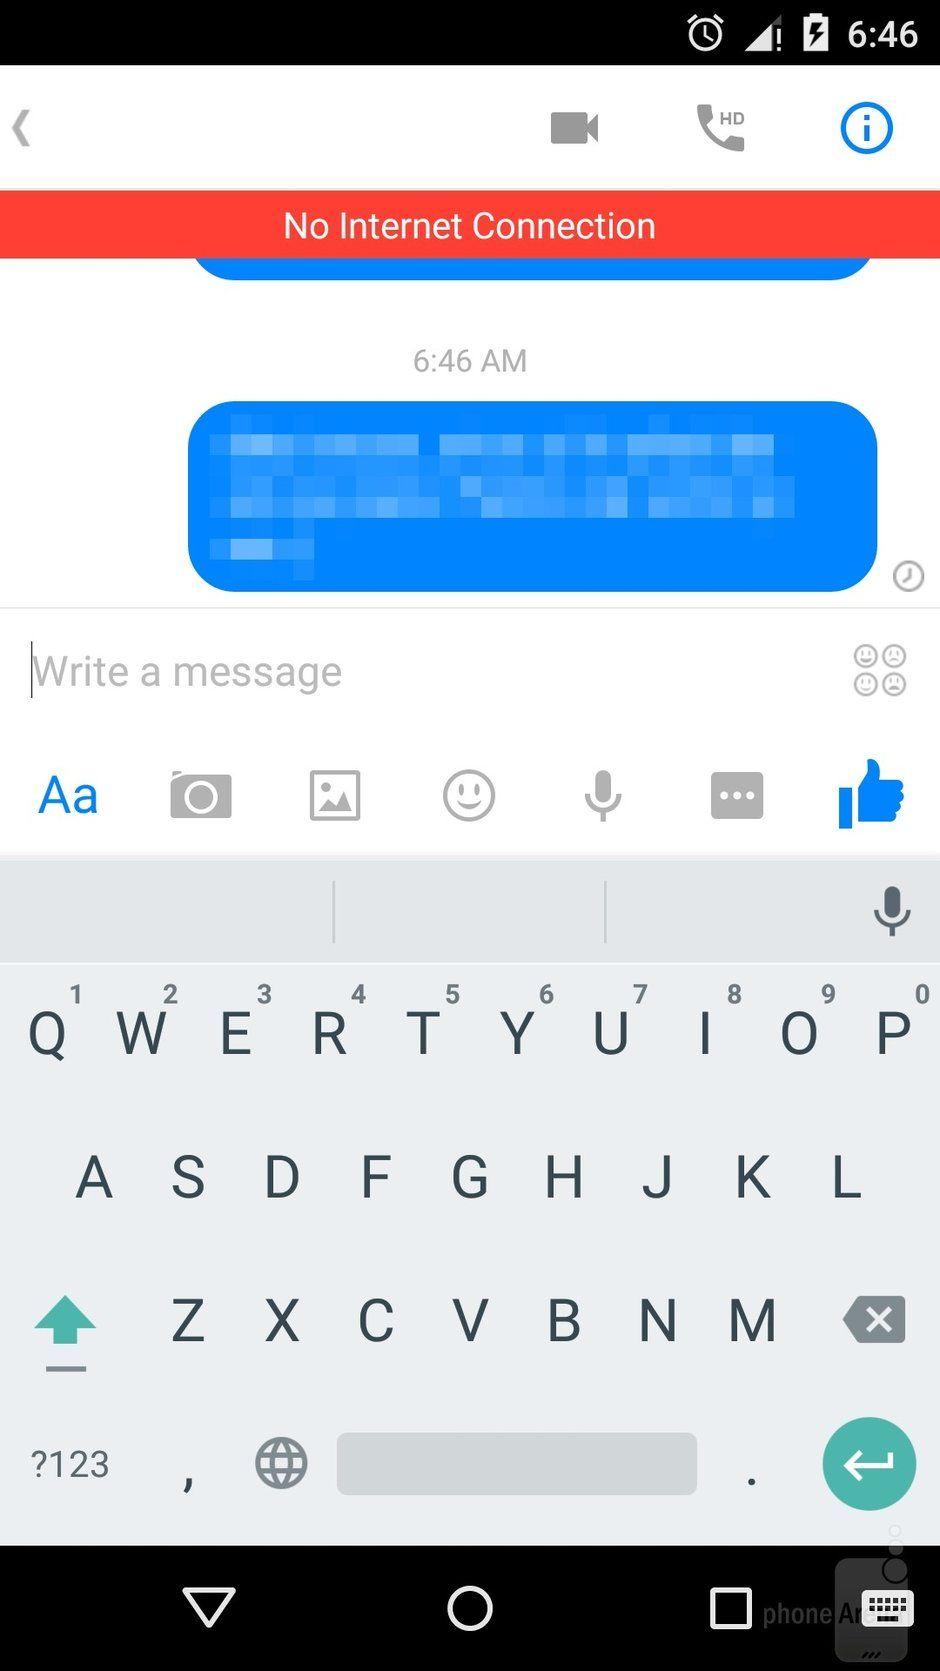 Blue Circle Facebook Logo - How to tell if your message has been read (seen) in Facebook's